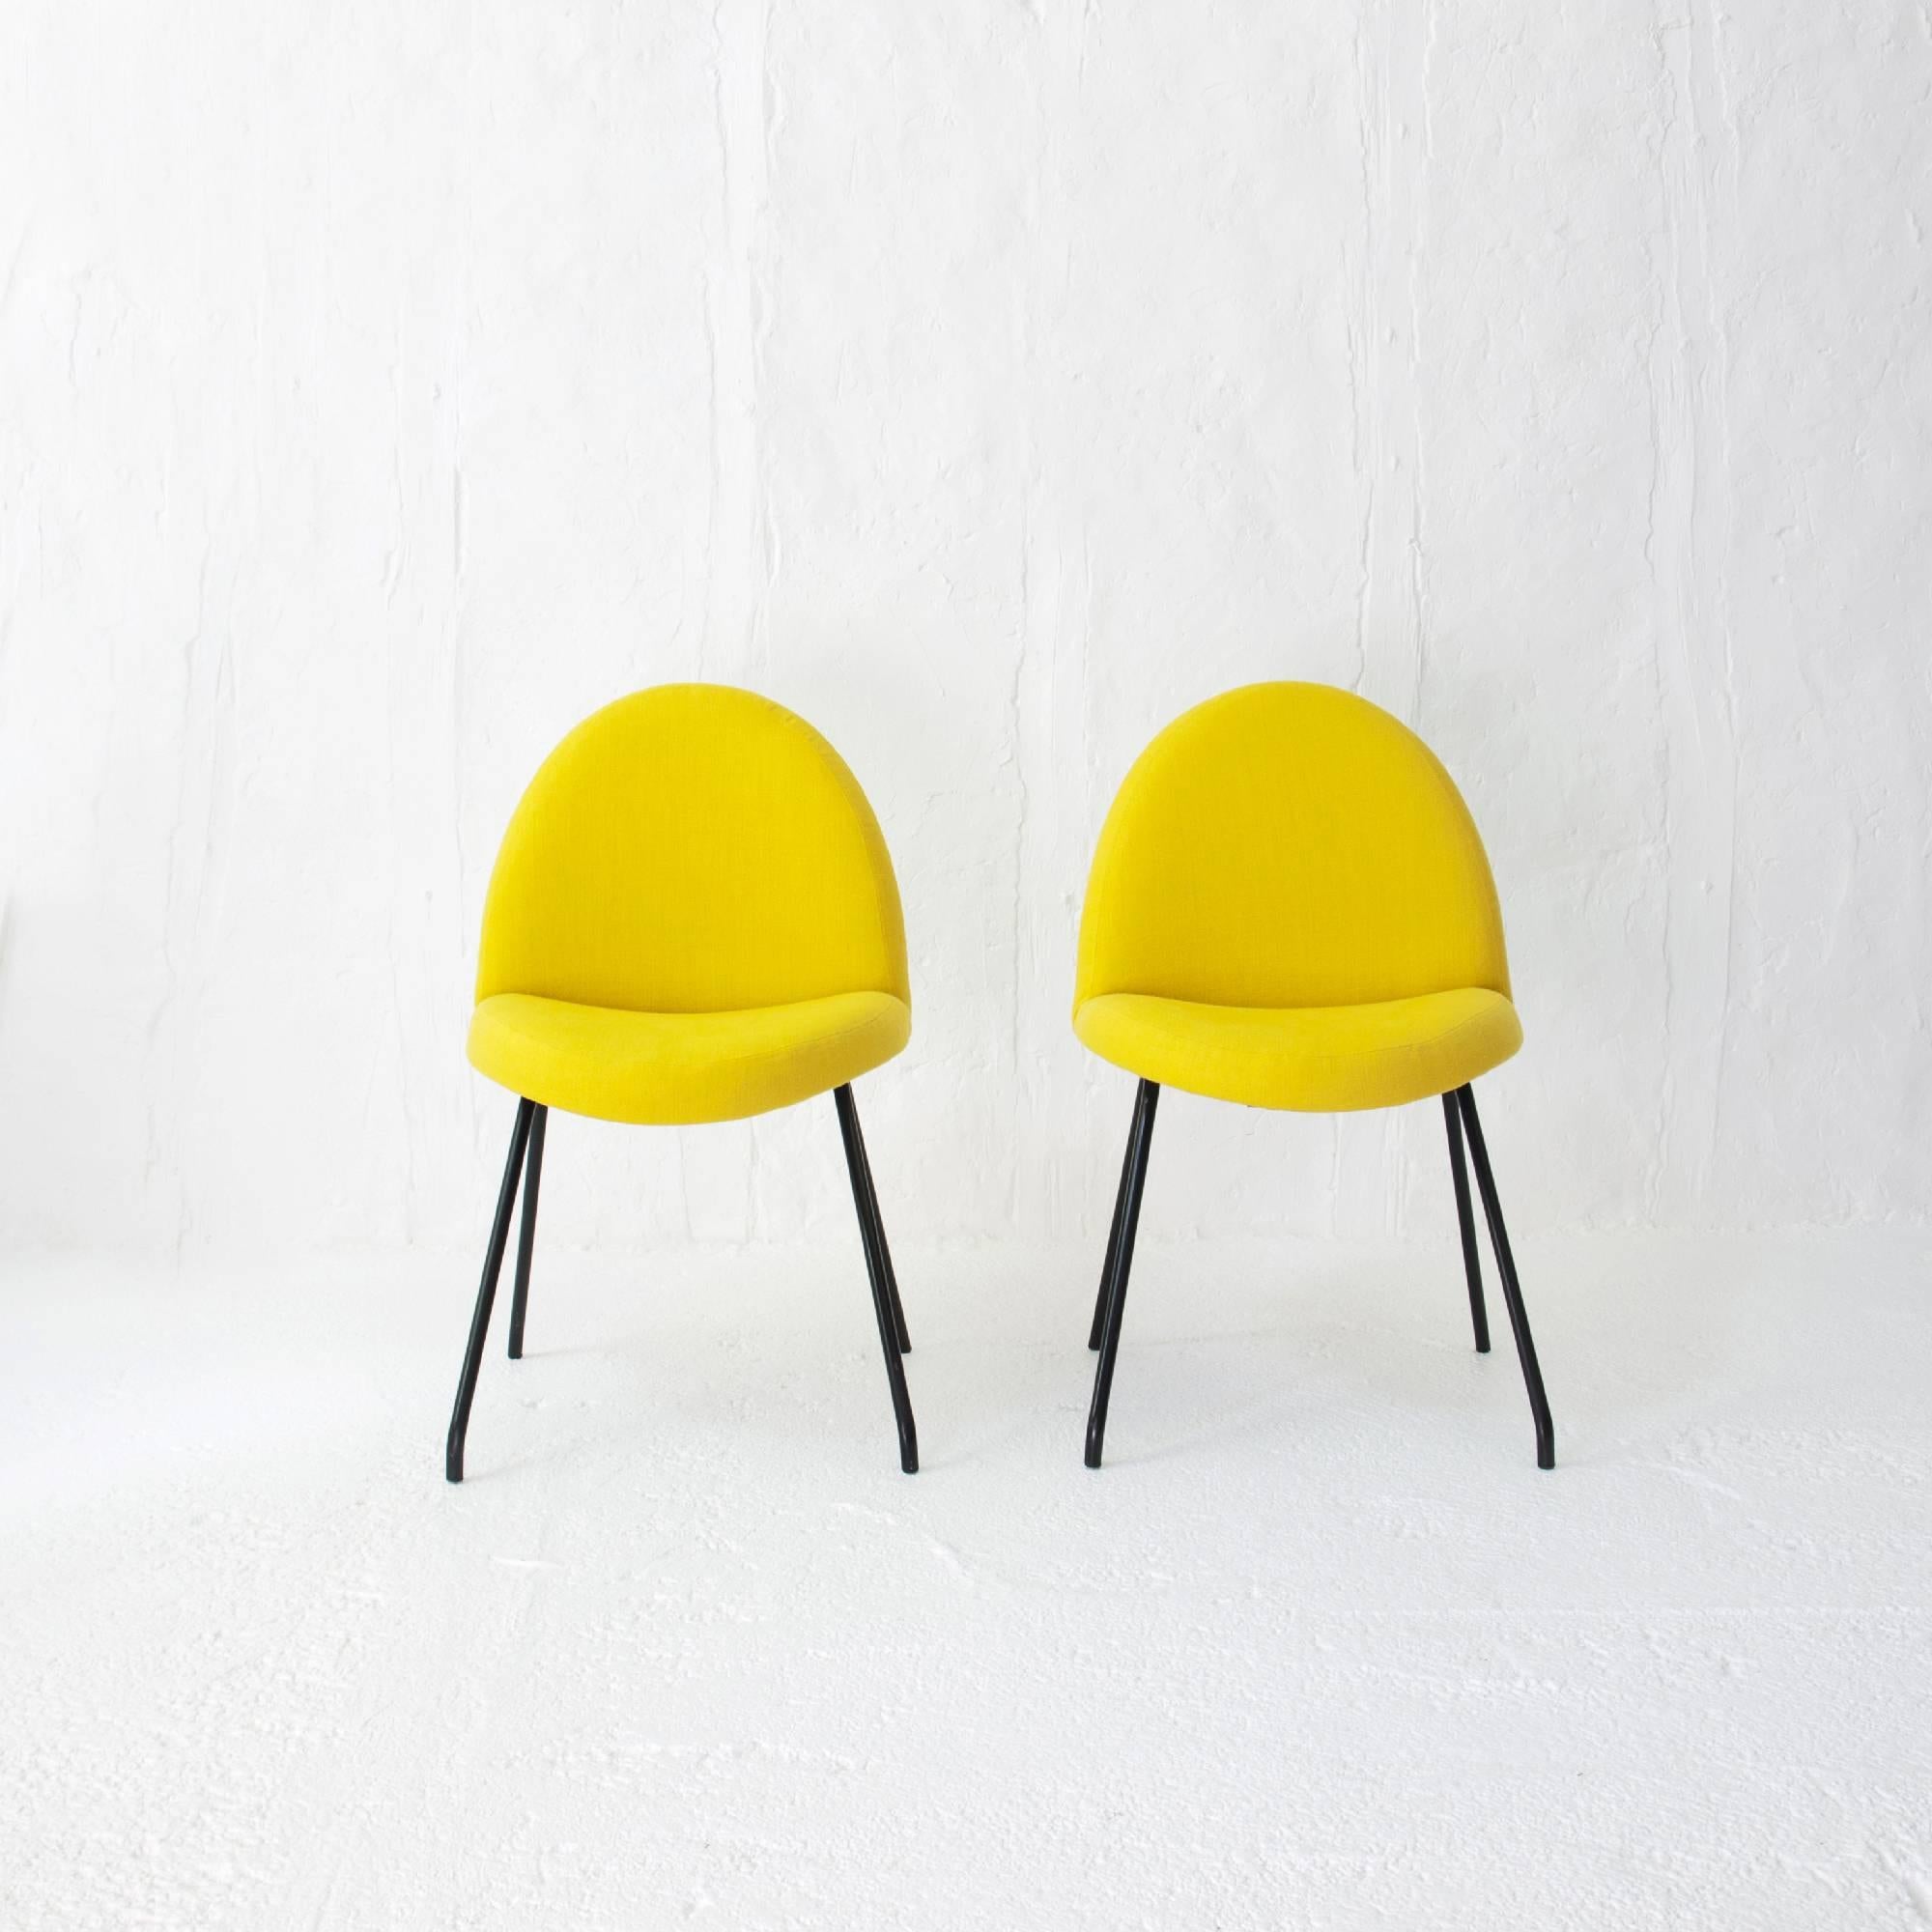 Pair of Joseph-André Motte chairs model 771 or tongue, Steiner edition.
Reupholstered in yellow linen.
Black metal legs.
Marked with original Steiner metal label.
In the collection of the musée des Arts Decoratifs Paris